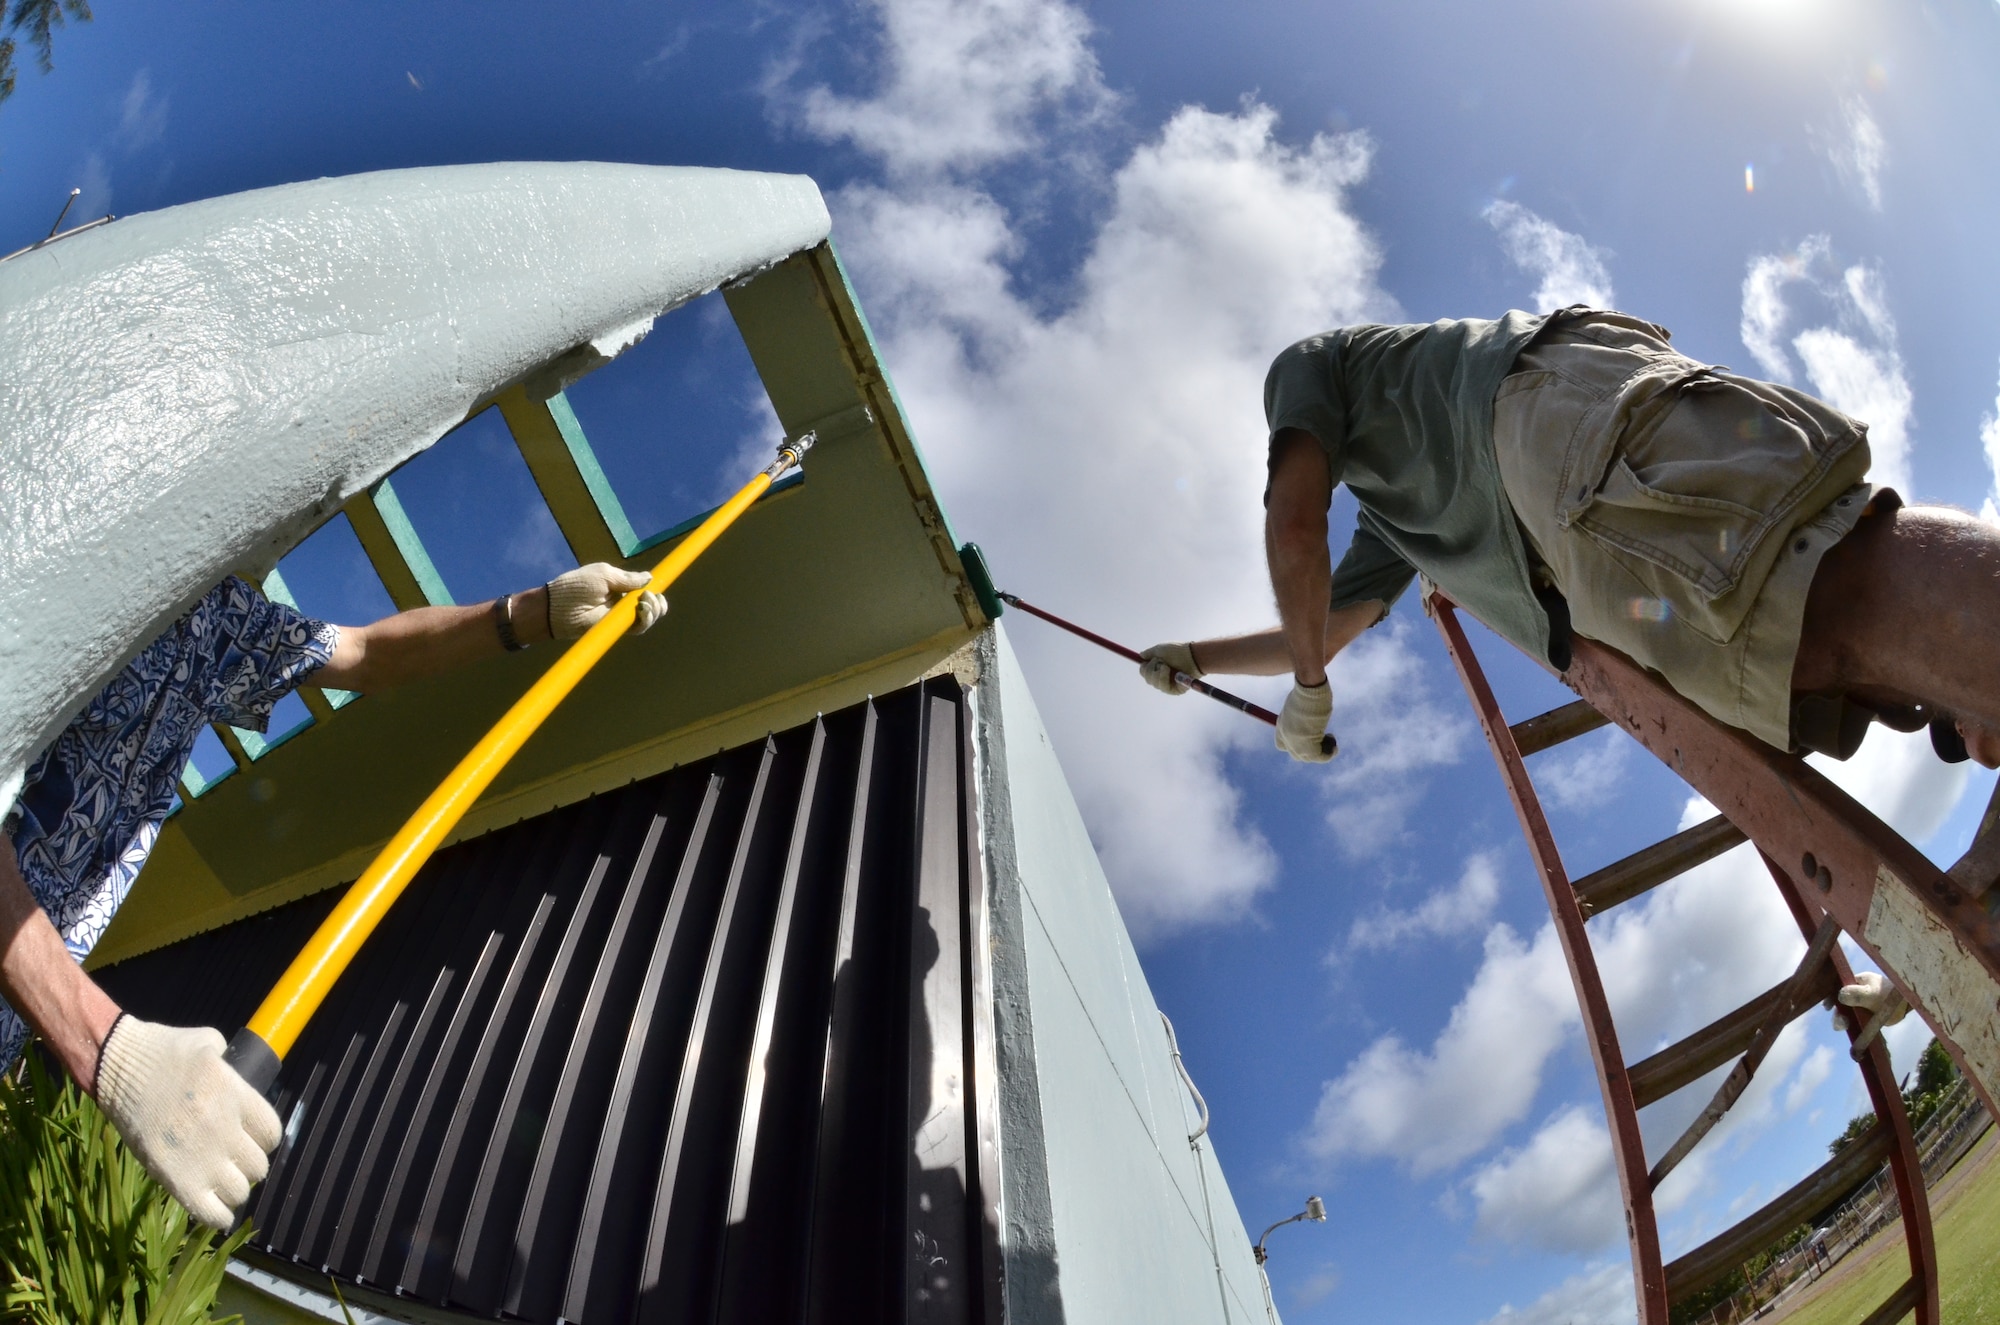 ANDERSEN AIR FORCE BASE, Guam - Members of Team Andersen along with members from the Japan Air Self Defense Force and the Royal Australian Air Force
participate in a community beautification project in Dededo, Guam, Feb. 18.
(U.S. Air Force photo by Staff Sgt. Alexandre Montes) 
